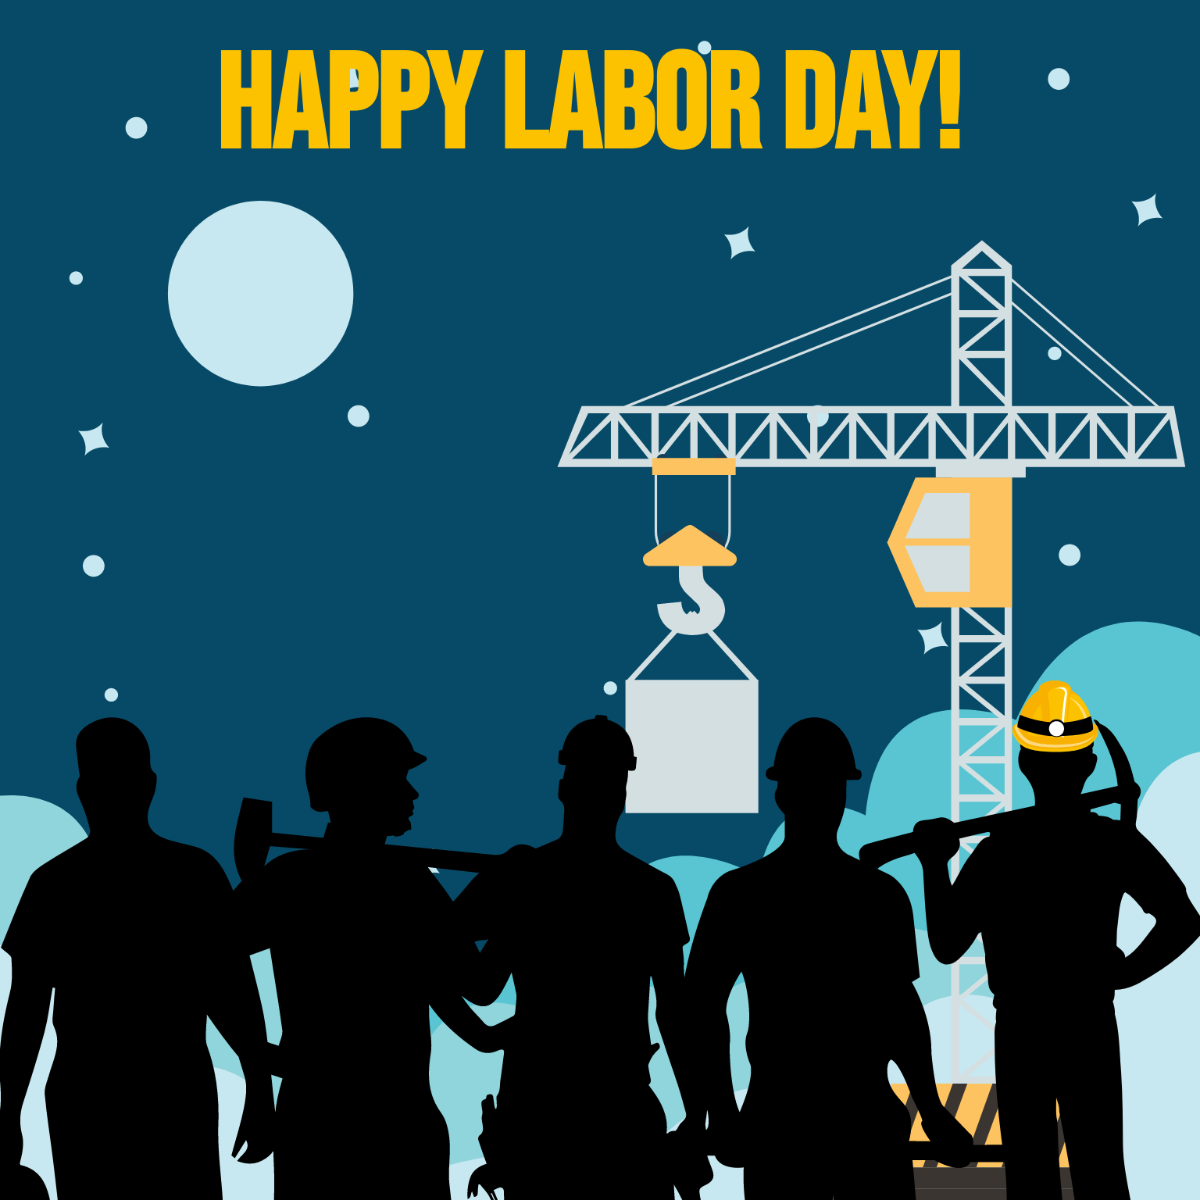 Free Happy Labor Day Illustration Template